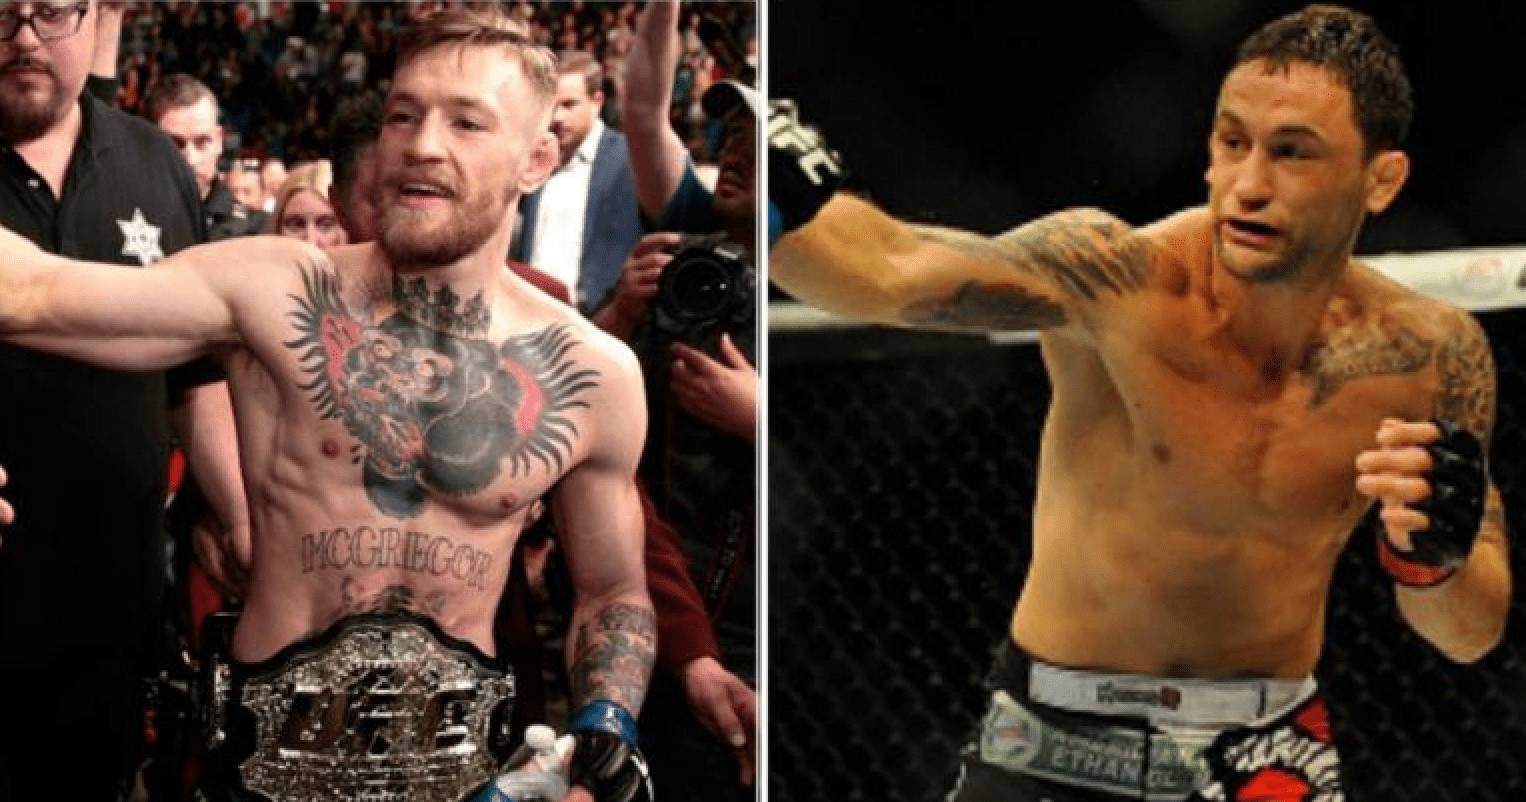 Conor McGregor And Frankie Edgar Agree To Fight In December